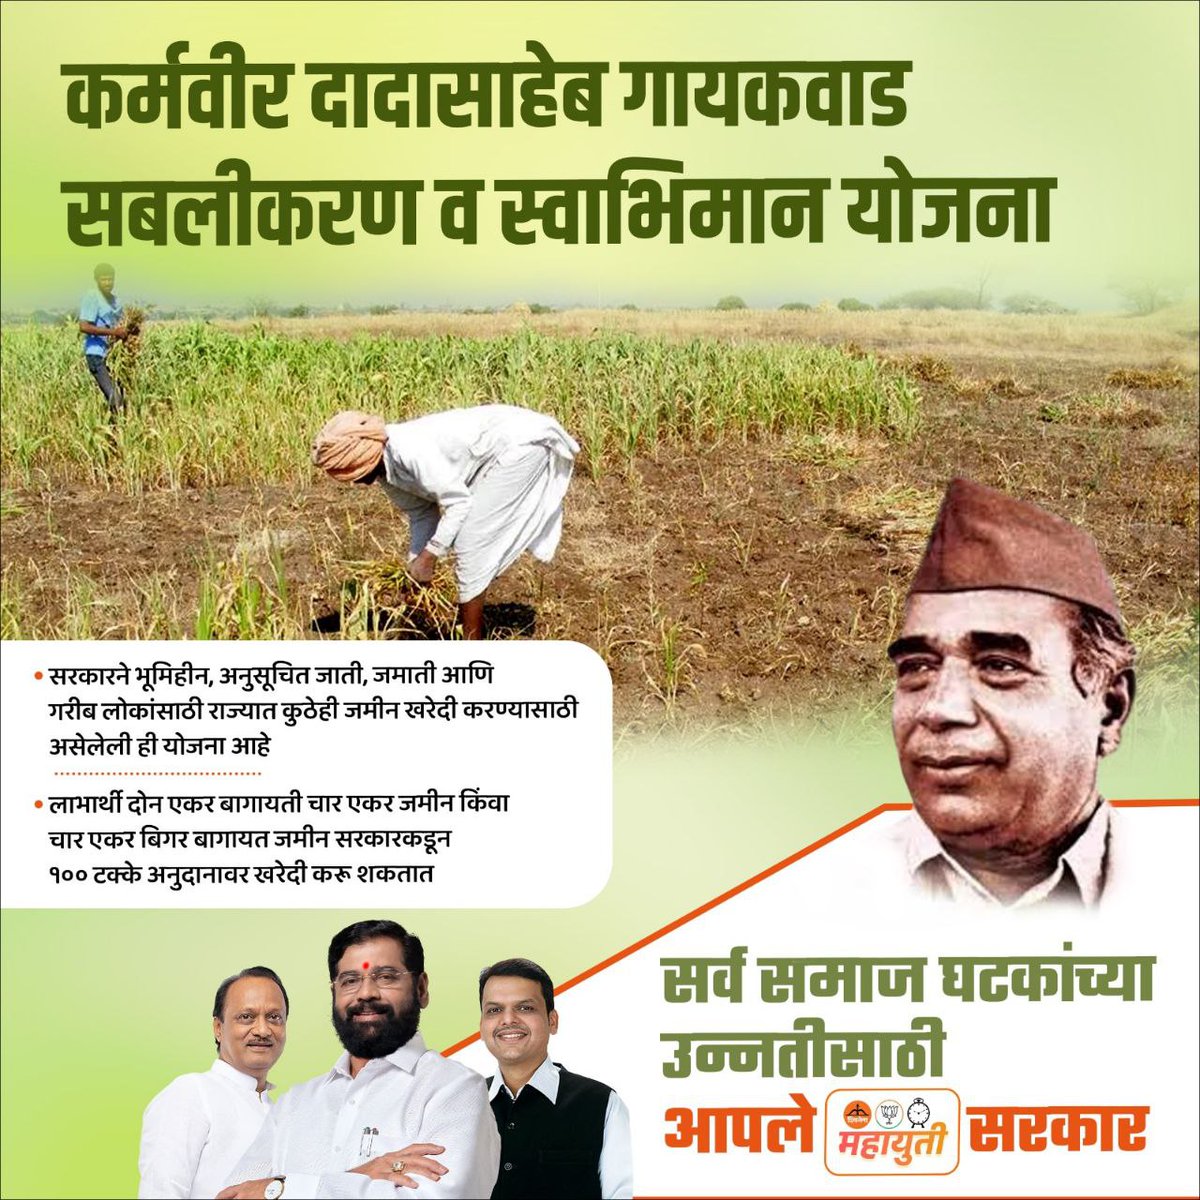 Applauding CM Eknath Shinde for the visionary Karmaveer Dadasaheb Gaikwad scheme, enabling landless SC, ST, and poor families to own land with 100% subsidy. A transformative move for social upliftment!